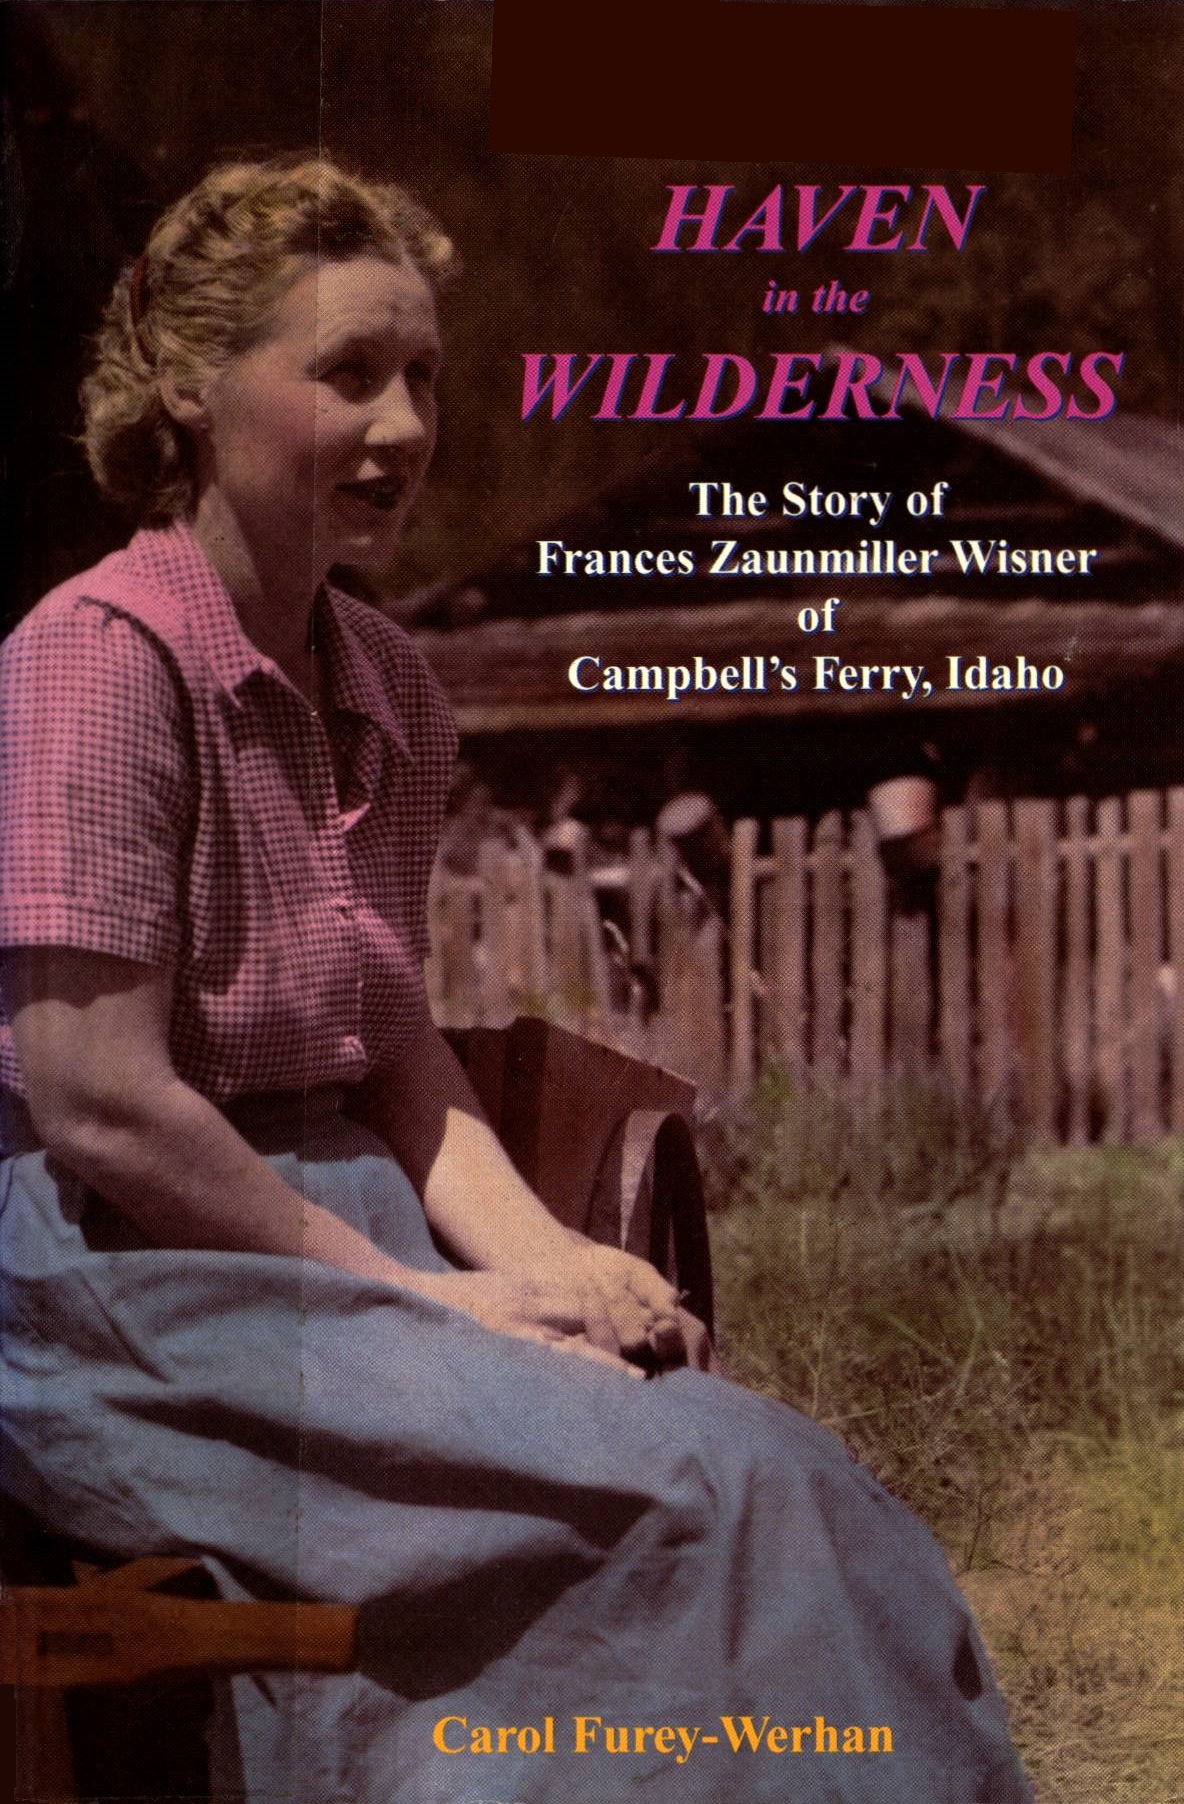 Haven in the wilderness: The story of Frances Zaunmiller Wisner of Campbell's Ferry, Idaho (book cover)